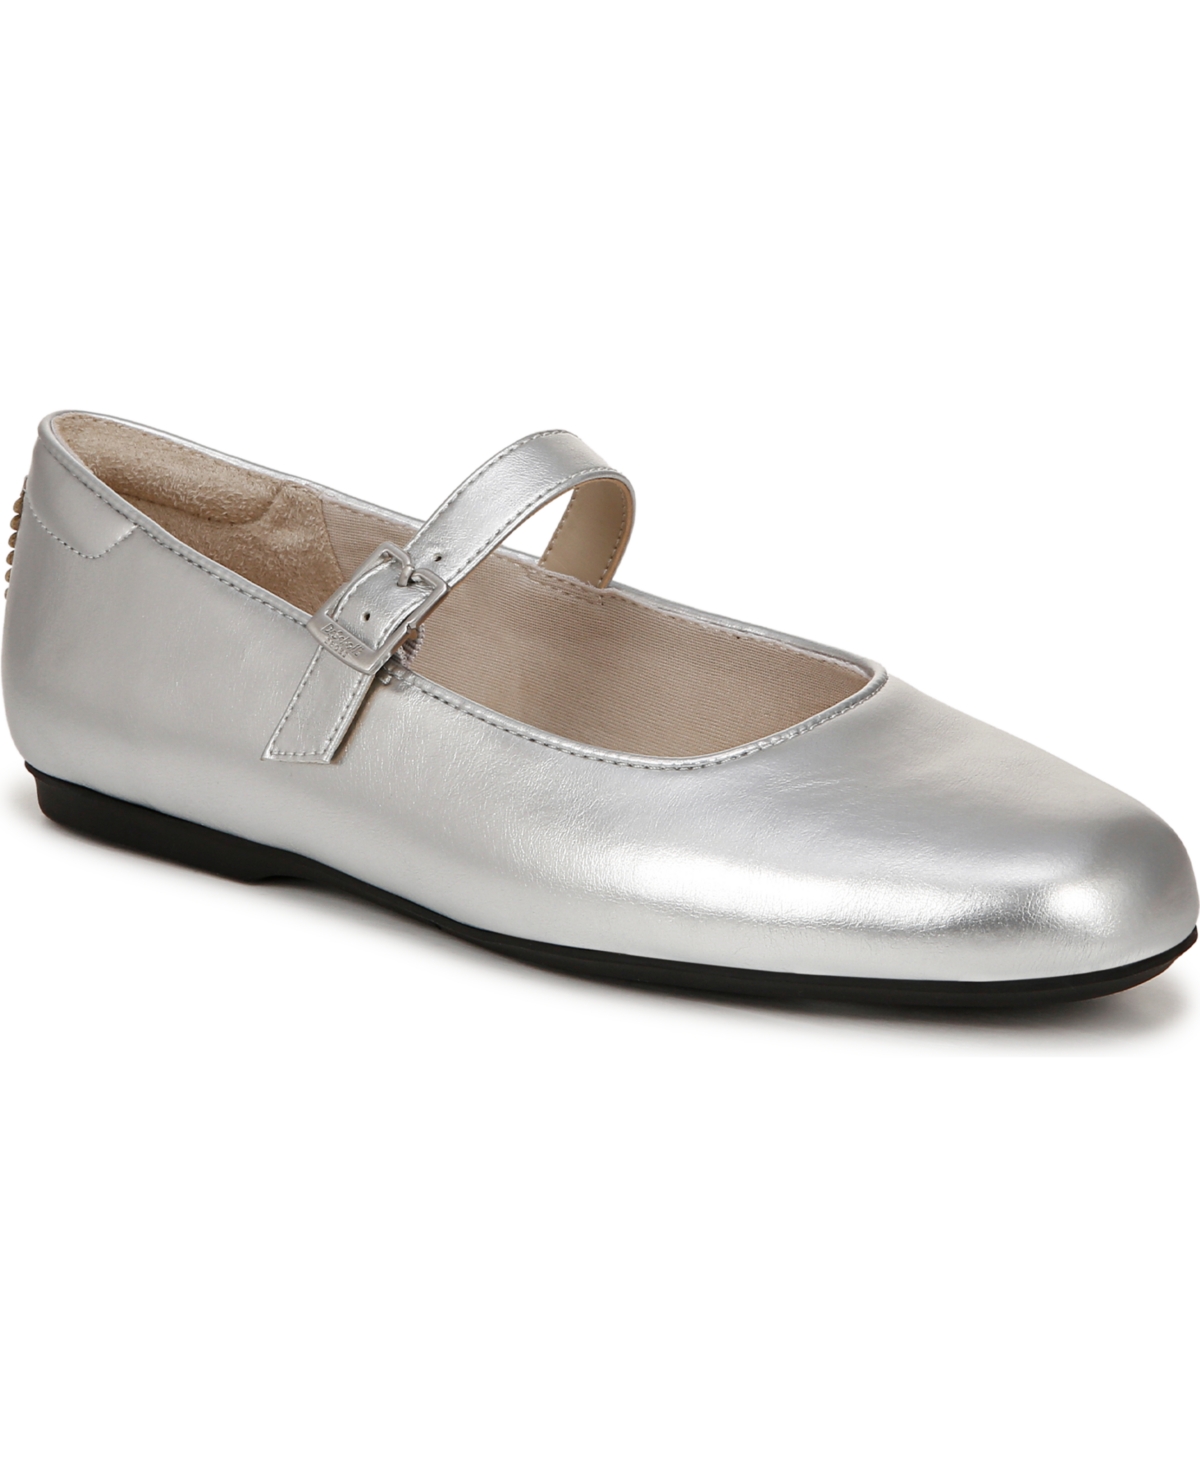 Women's Wexley Jane Flats - Silver Faux Leather